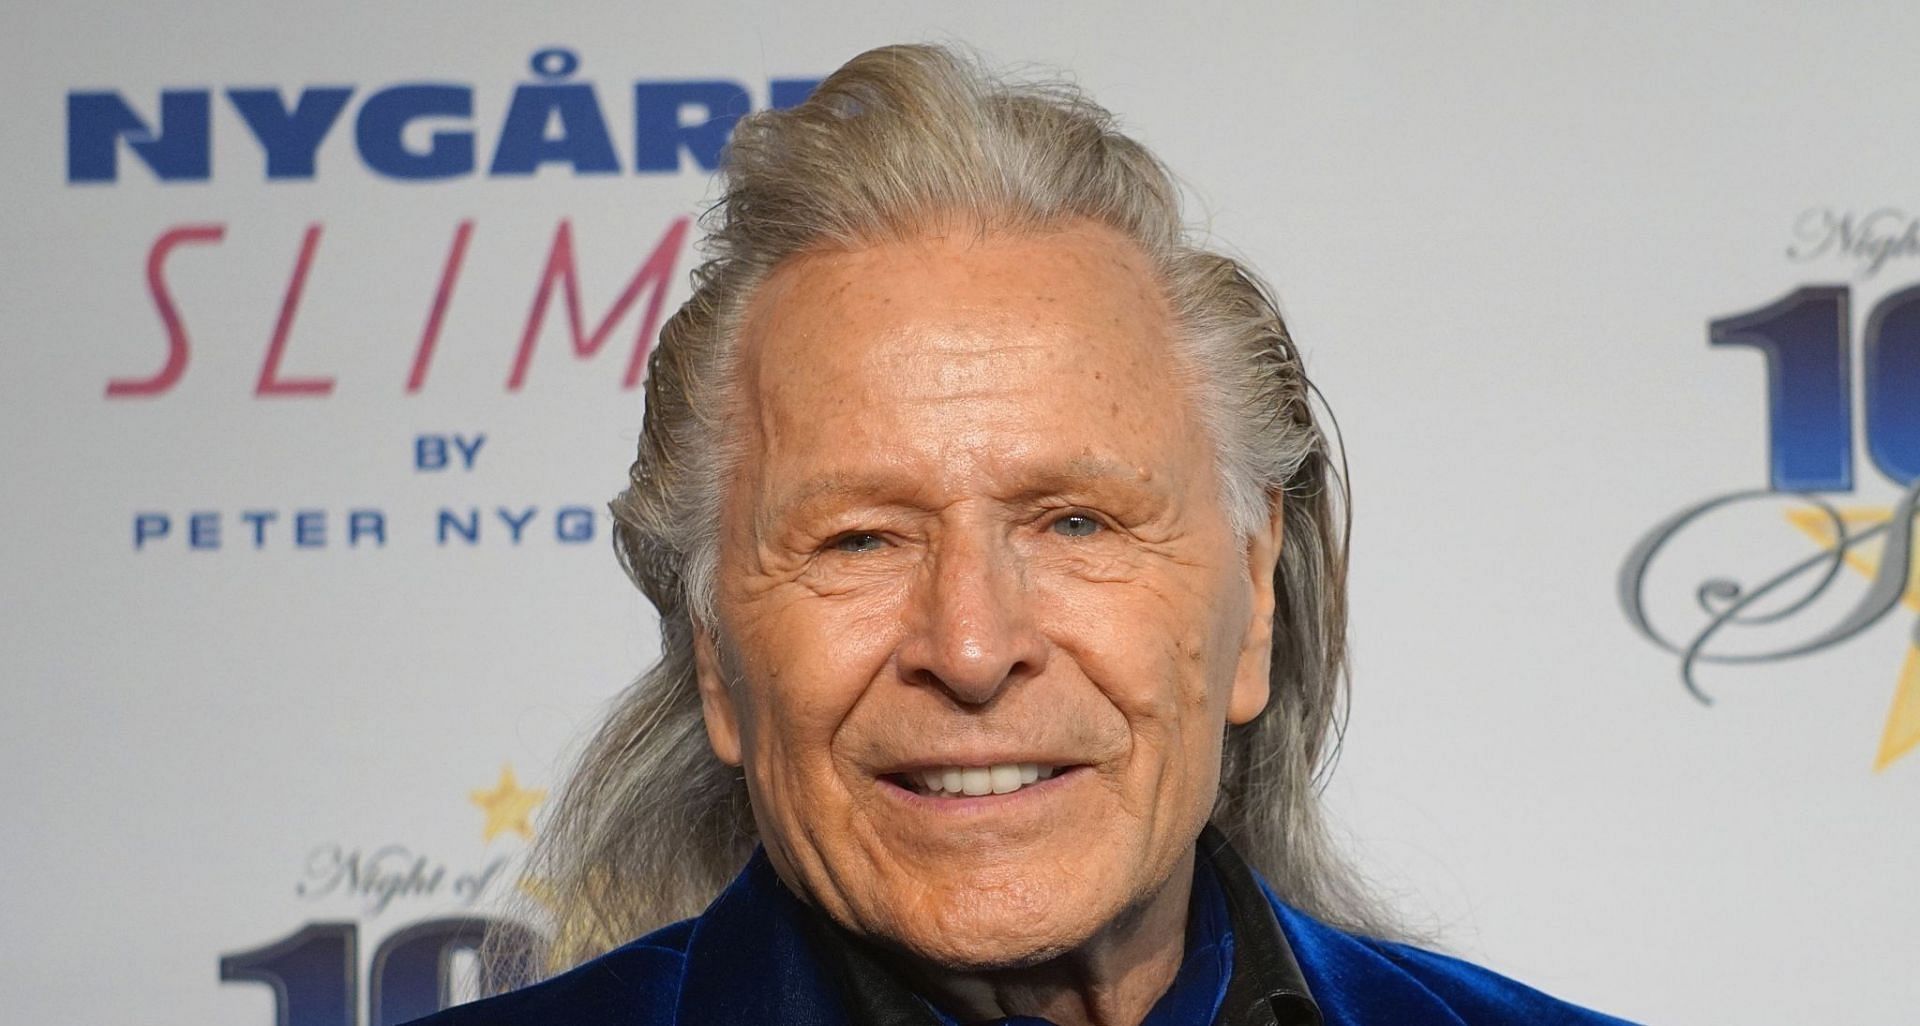 Peter Nygard&rsquo;s sons are helping his victims to speak up against the fashion mogul (Image via Mintaha Neslihan Eroglu/Getty Images)